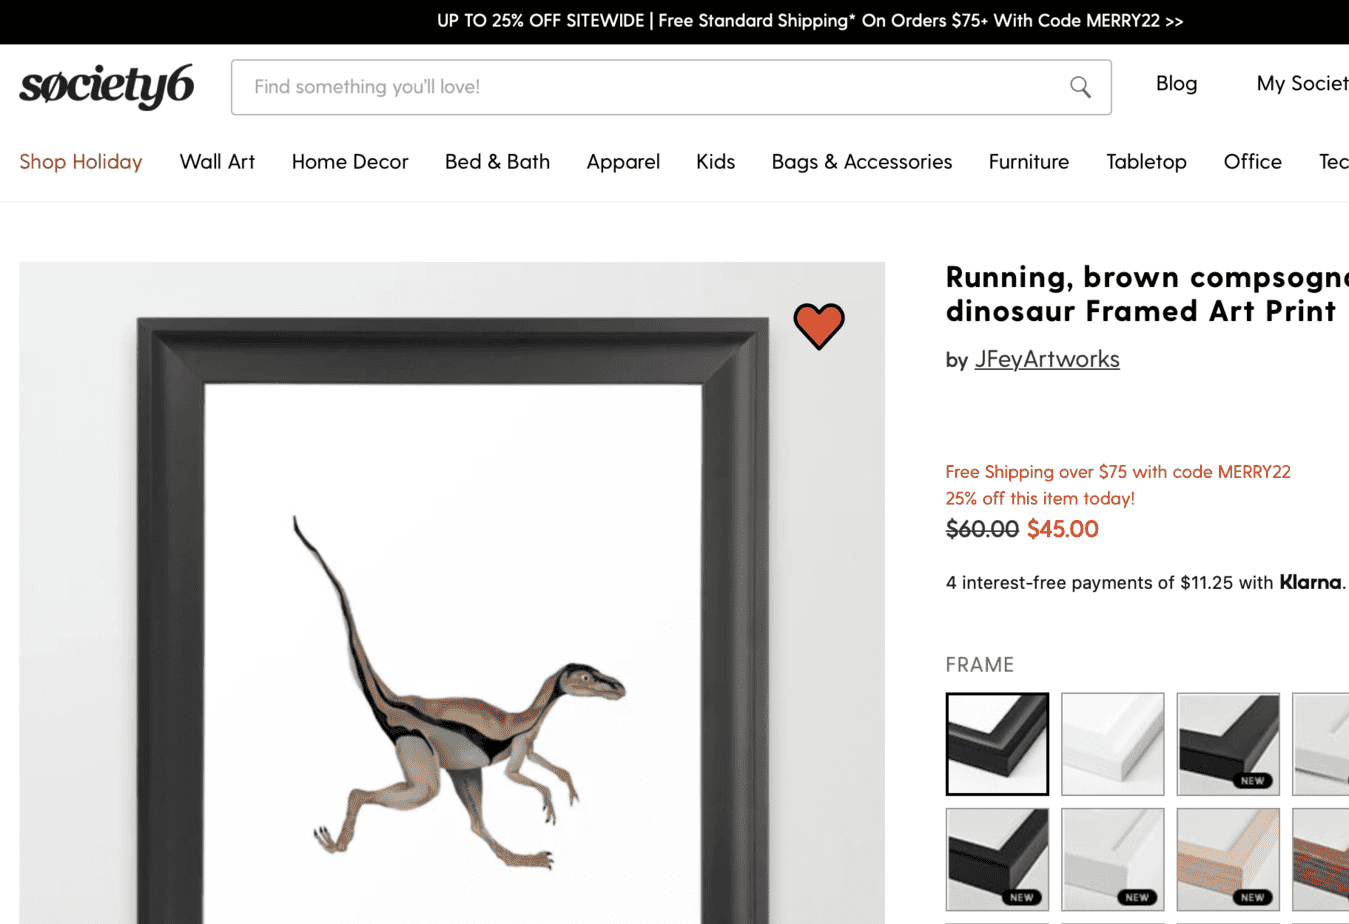 Screenshot of compsognathus dinosaur Framed Art Print from Society6. dinosaur gifts for a 5 year old